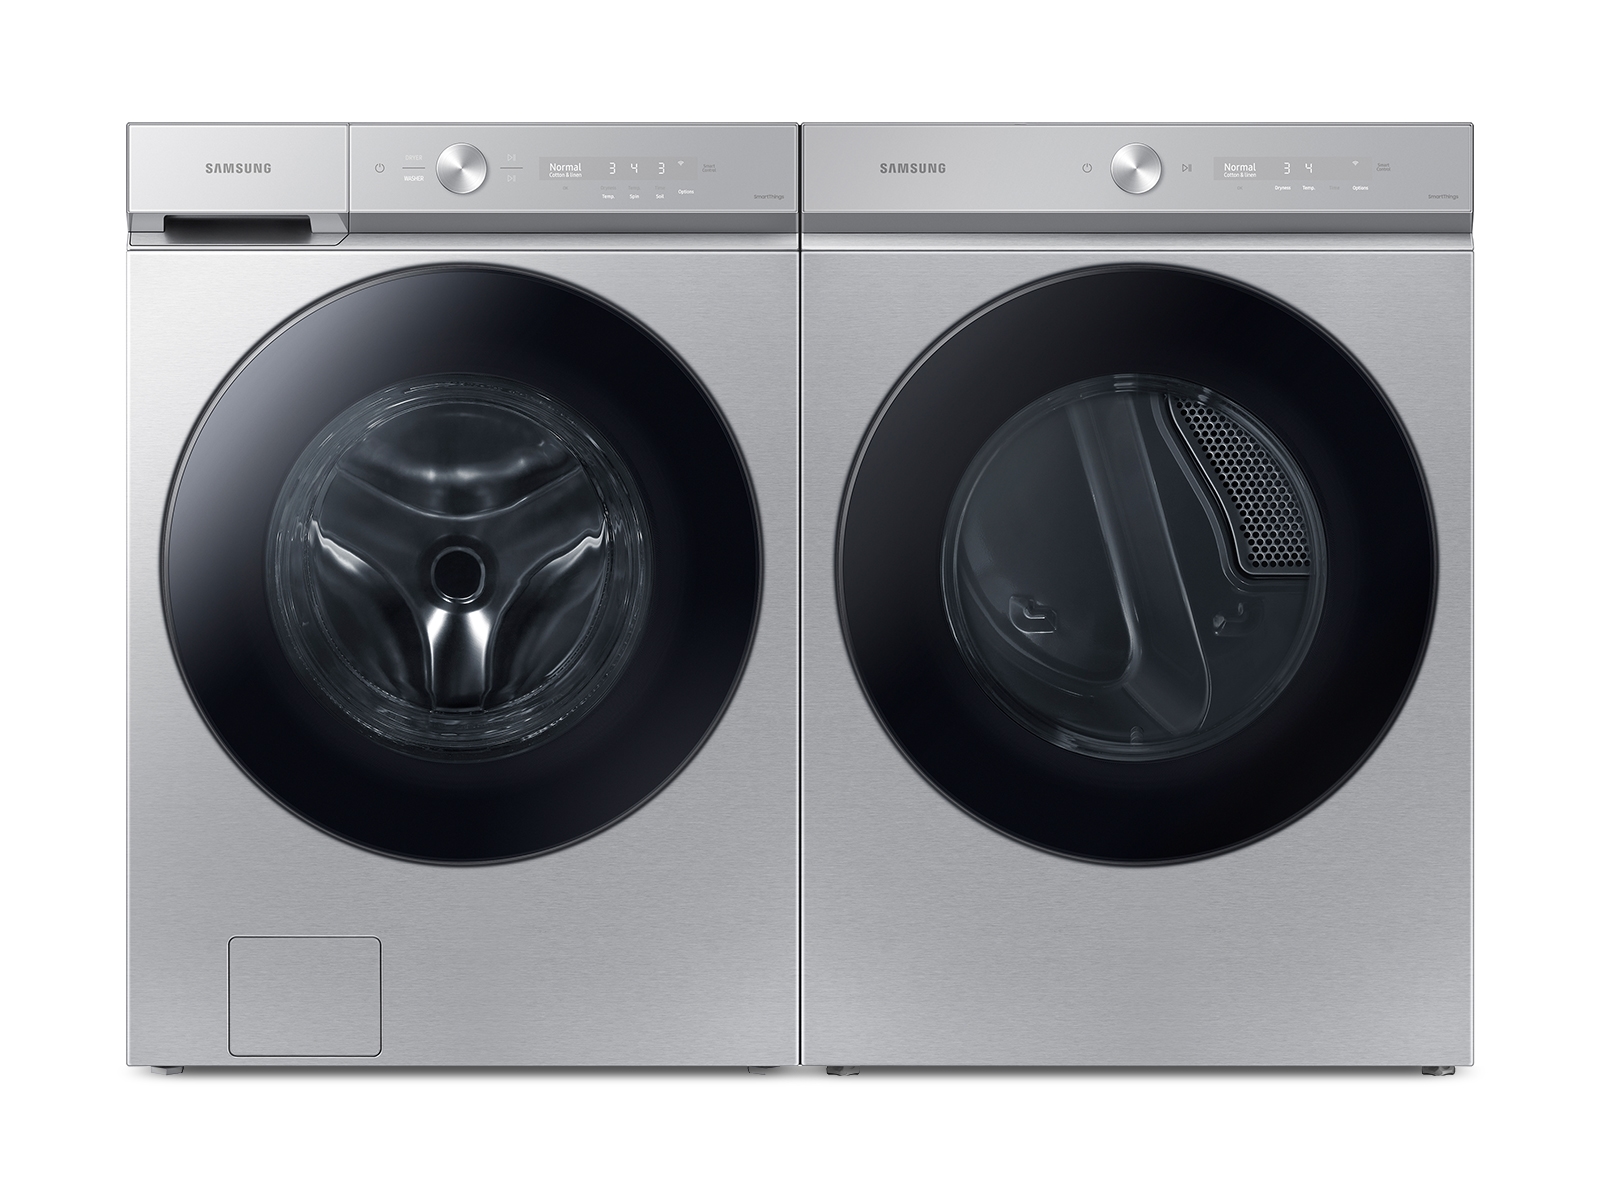 Photos - Tumble Dryer Samsung Bespoke Ultra Capacity Front Load Washer and Gas Dryer in Silver S 